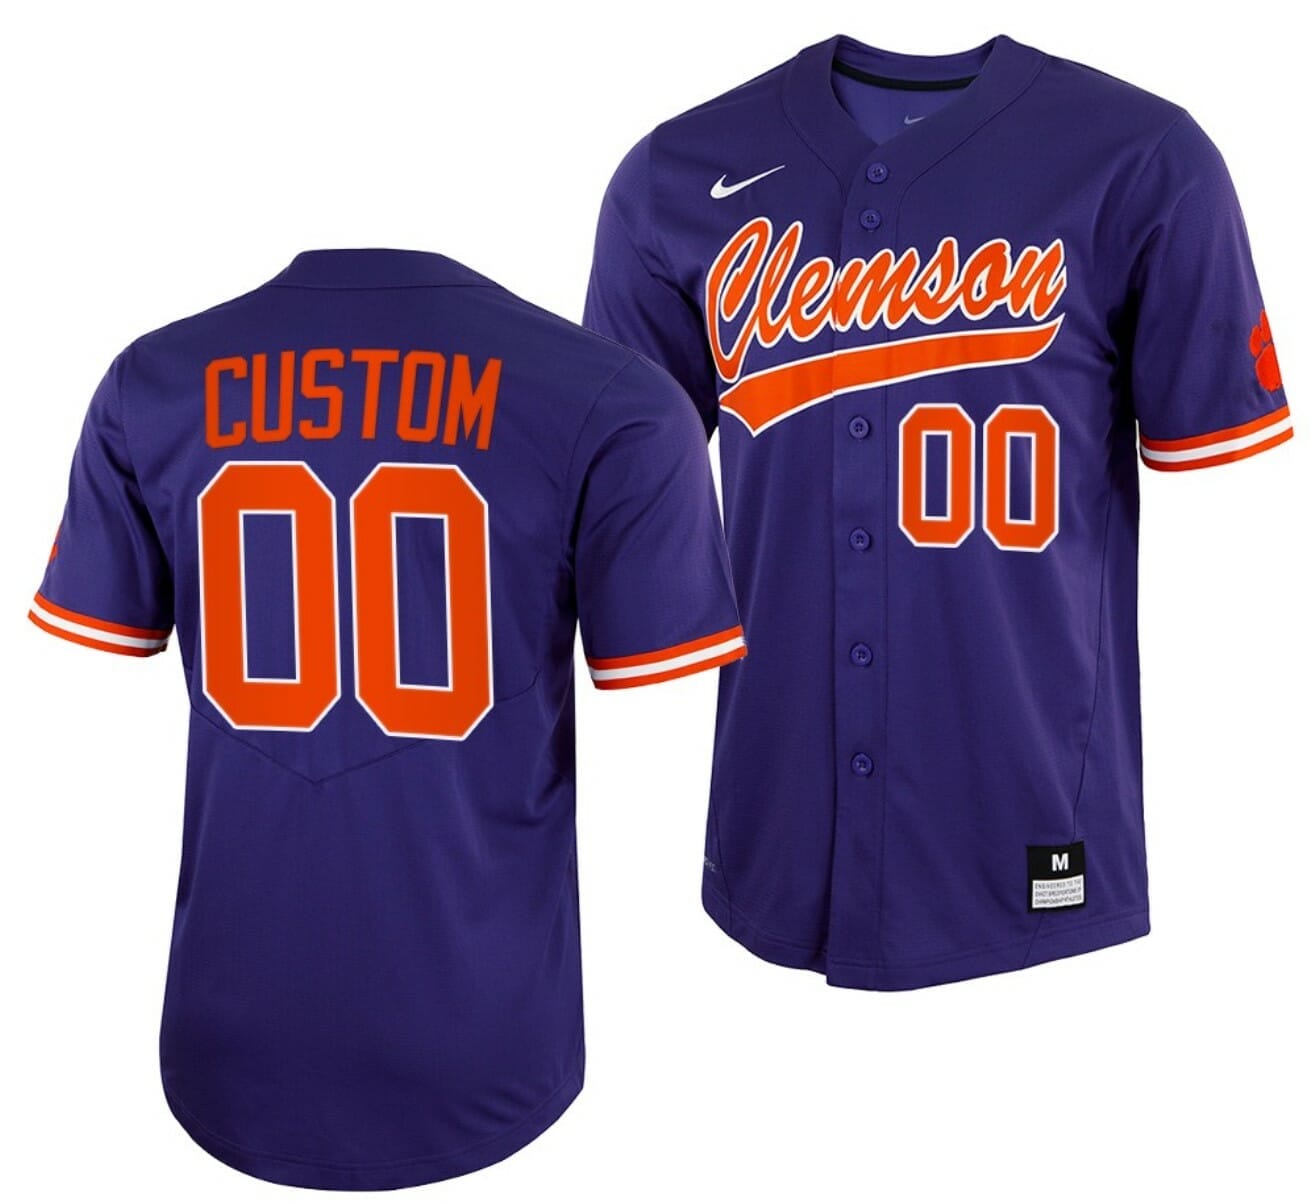 Clemson Tigers Jersey Custom Baseball Name and Number NCAA College Purple